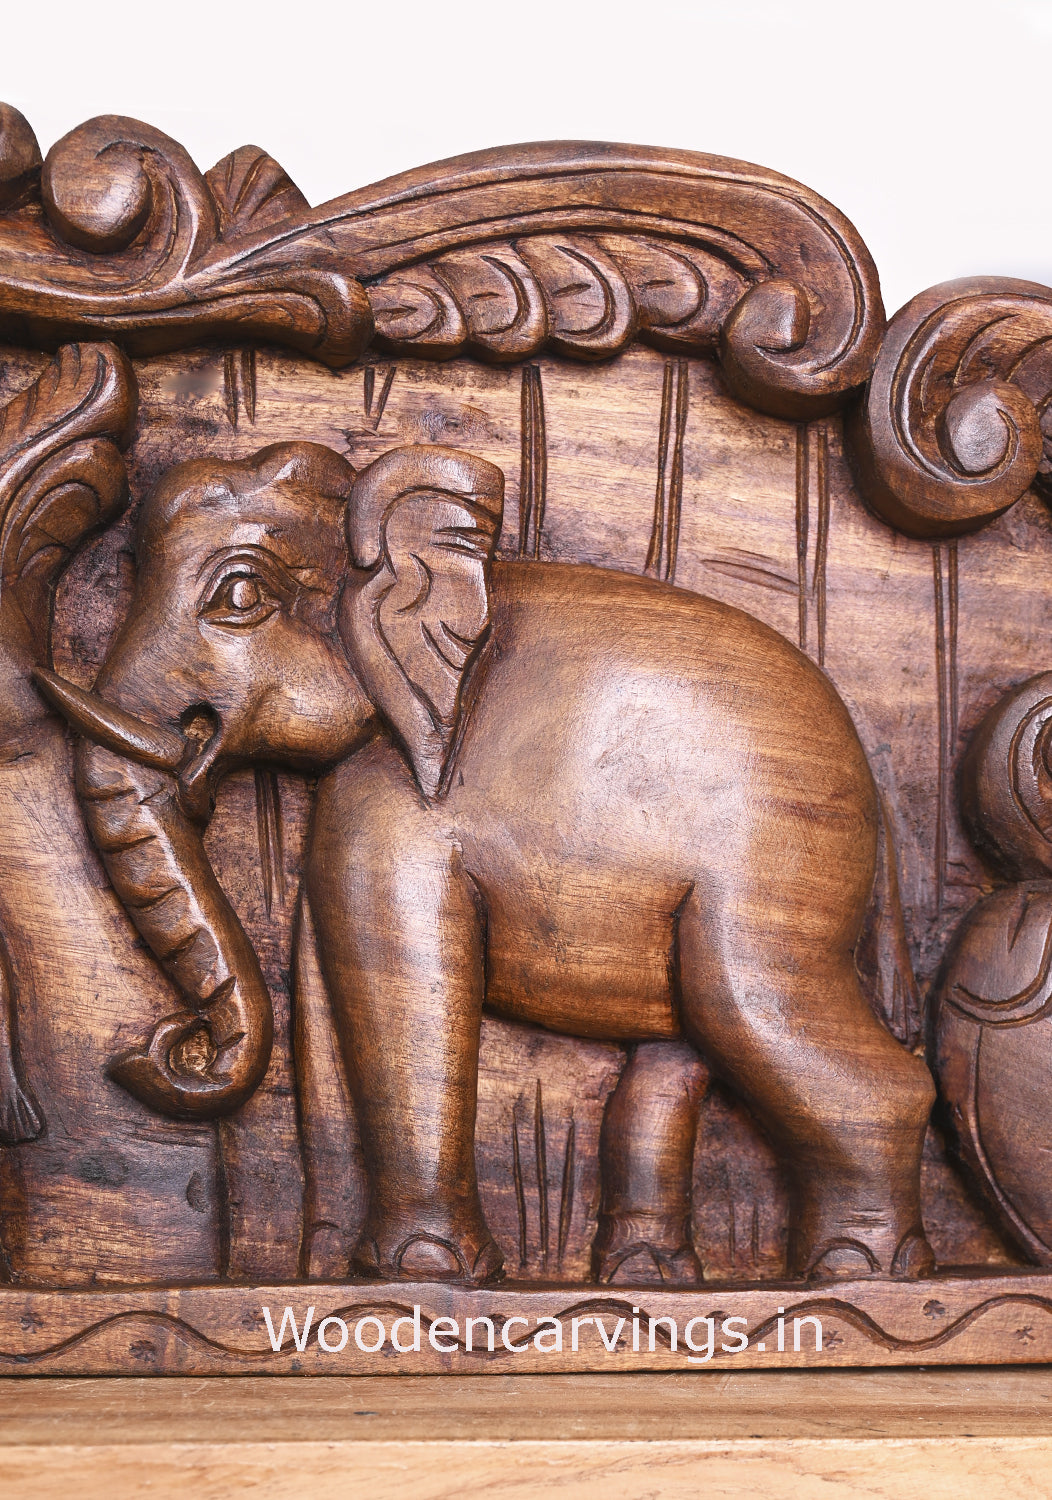 Beautiful Artistic Work of Group of Elephants Realistic Handmade Decorative Wooden Wall Panel 48"